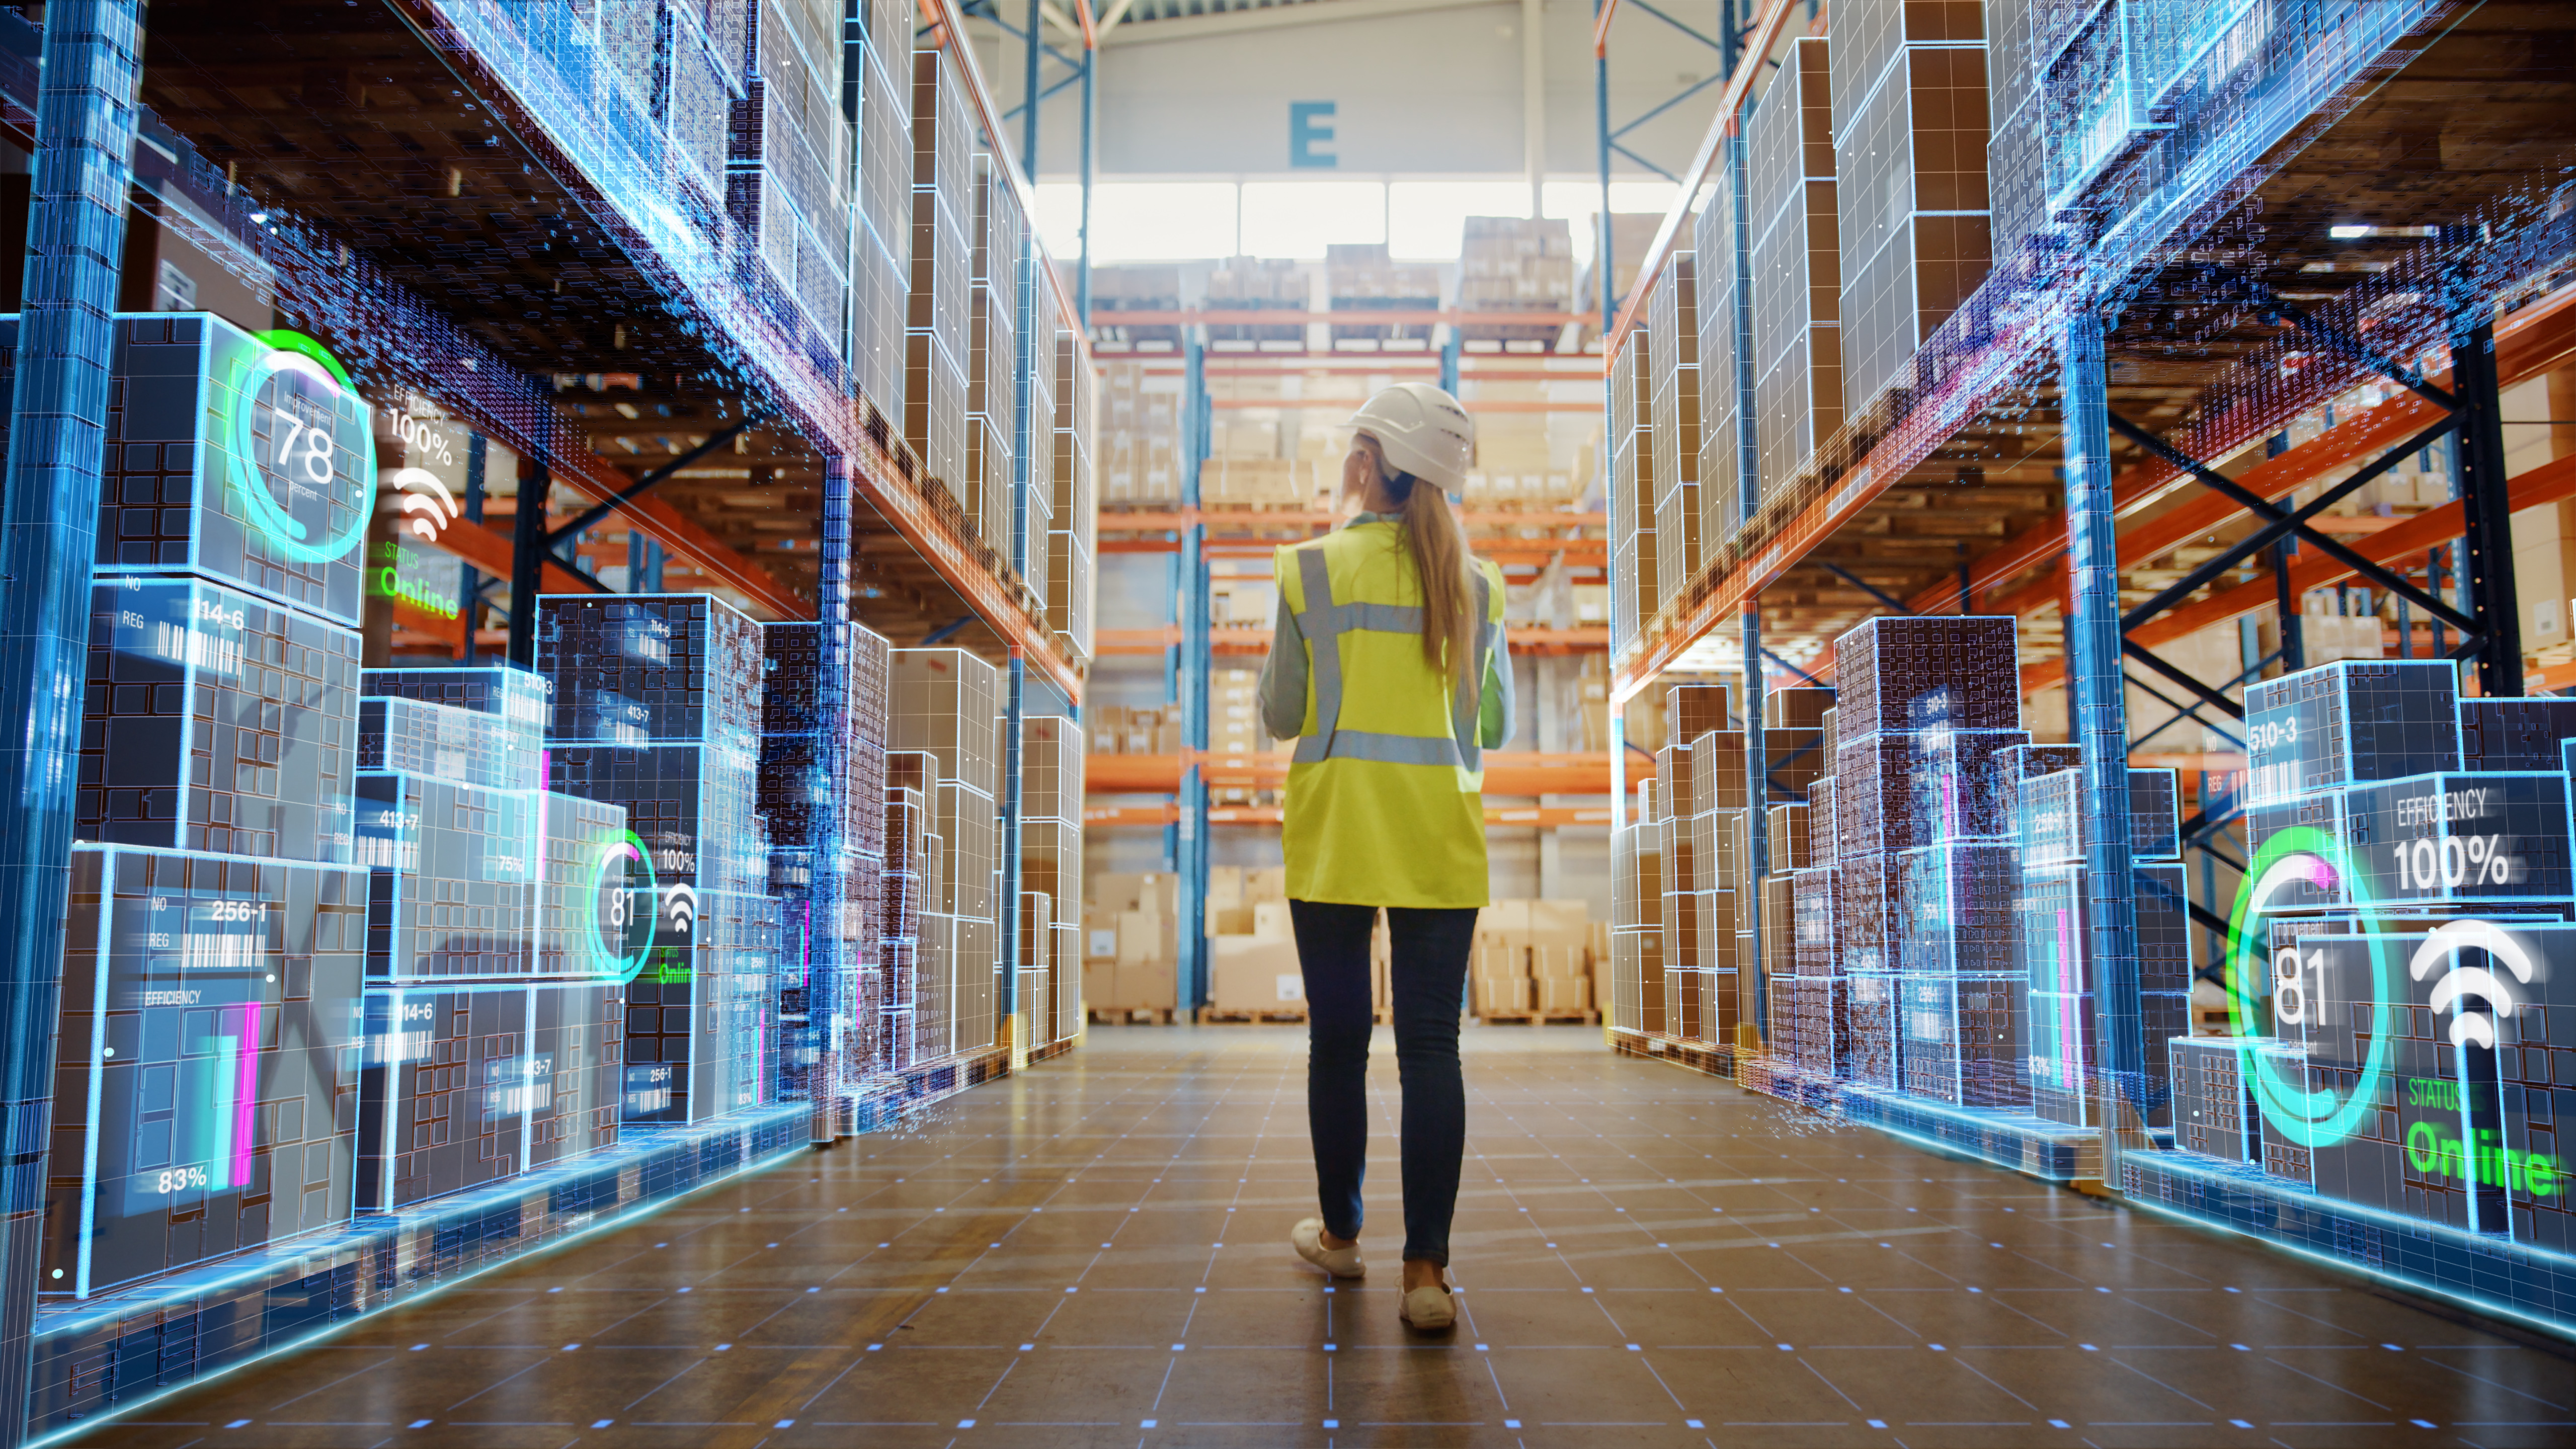 Address supply chain issues with improved inventory control